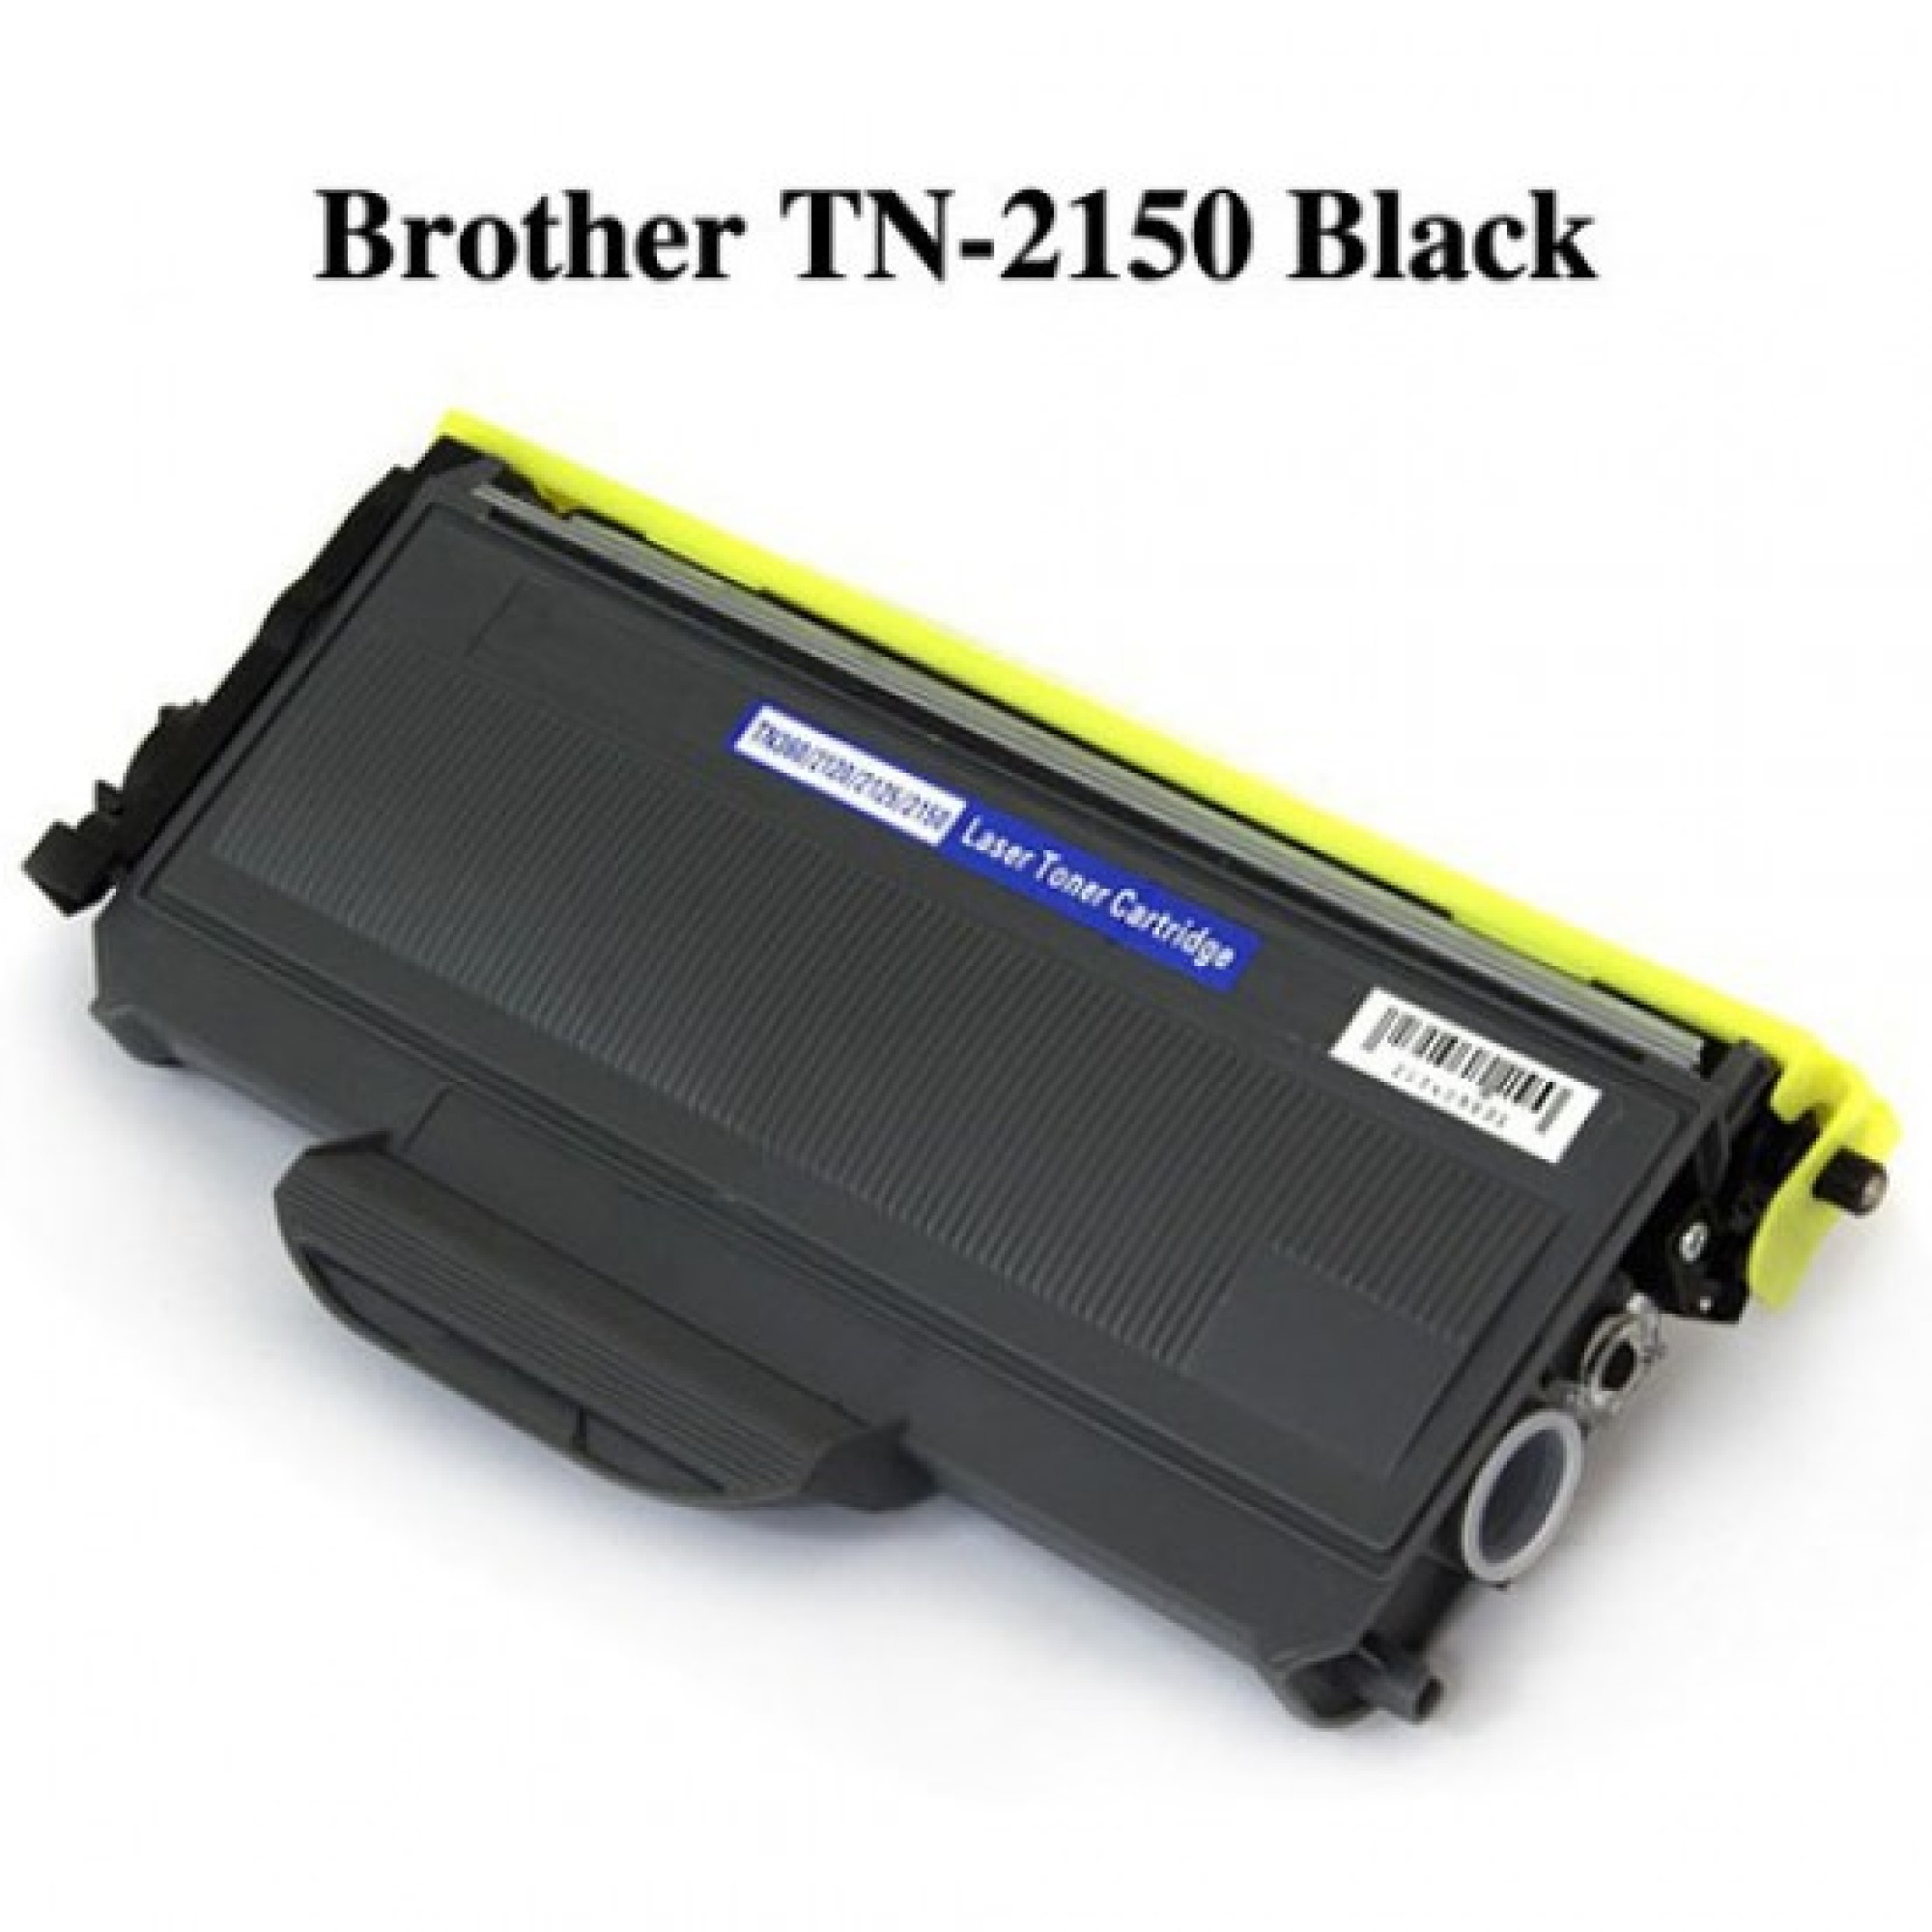 Tn2150 Cartridge for copy printer Brother MFC7440N